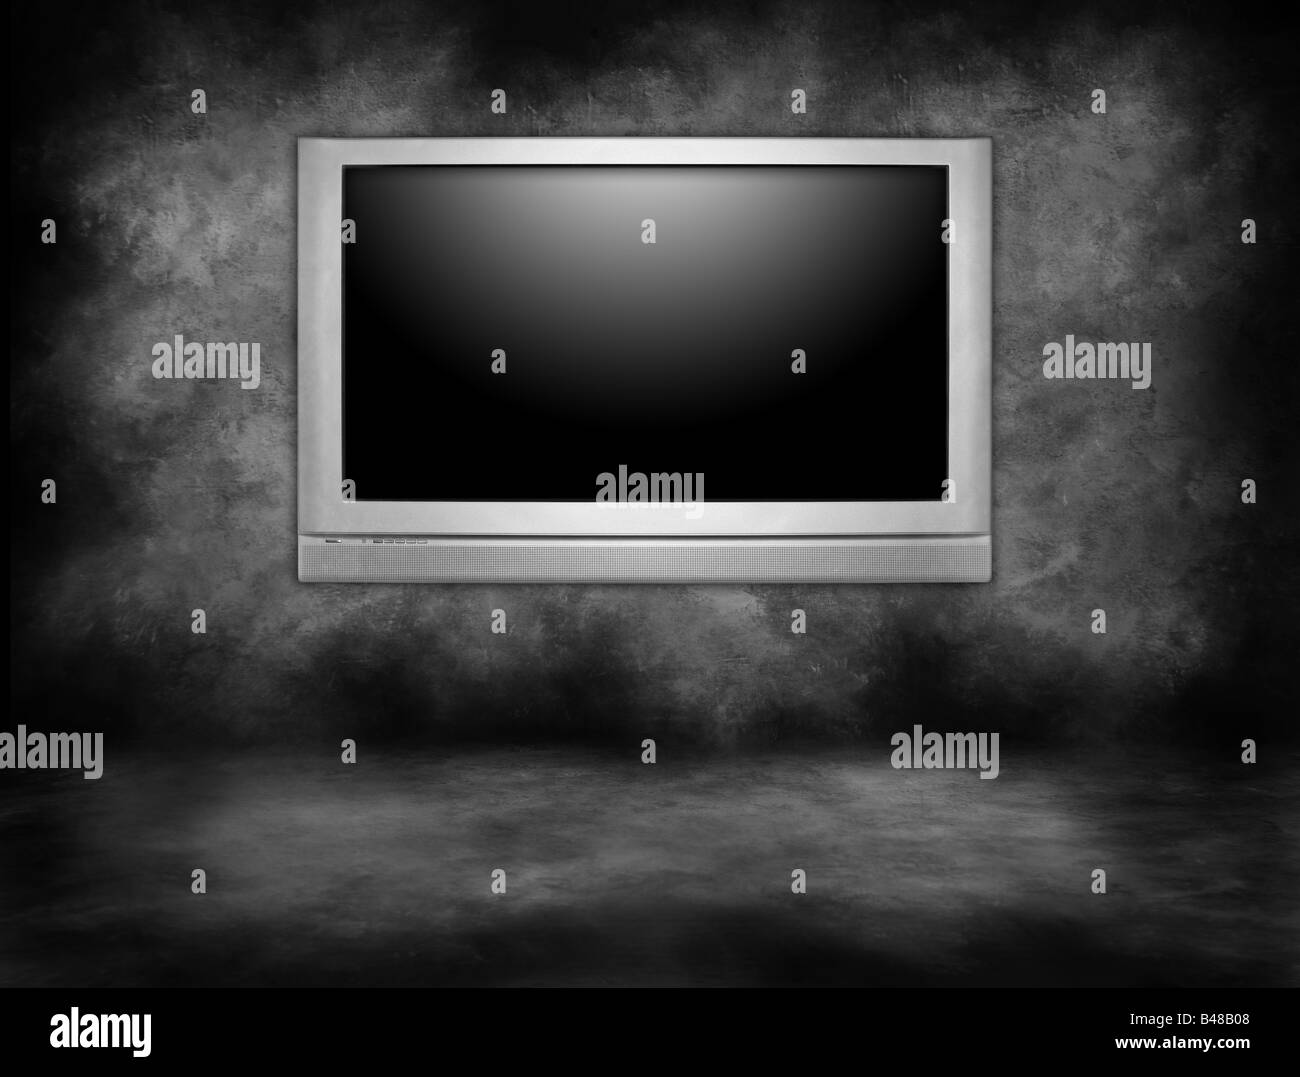 Silver Plasma Television Hanging on an Interior Wall in a Darkened Room Stock Photo